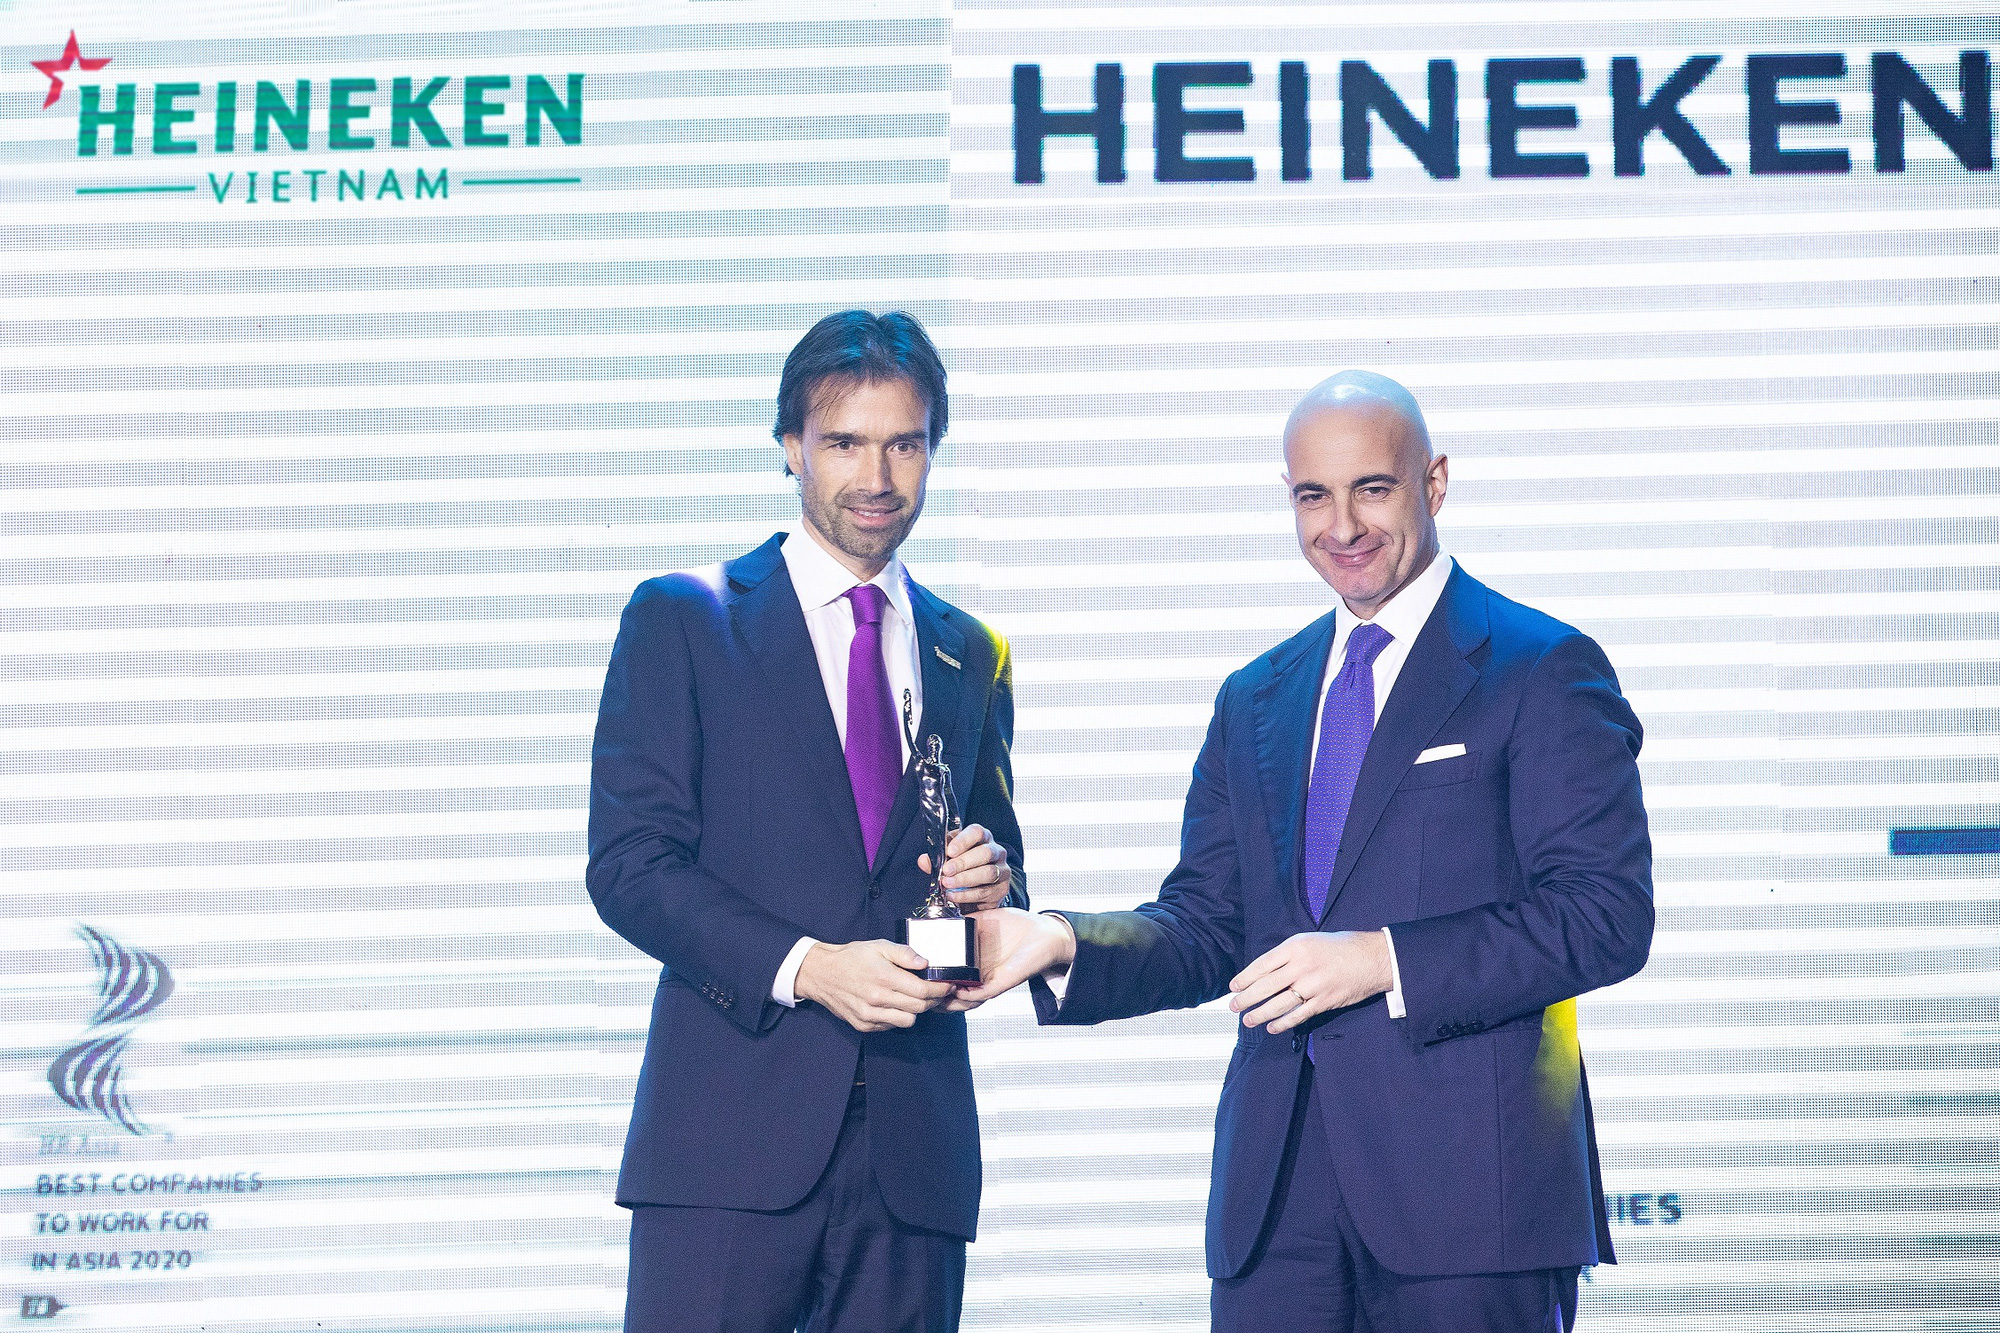 HEINEKEN Vietnam recognized as one of Asia's best places to work